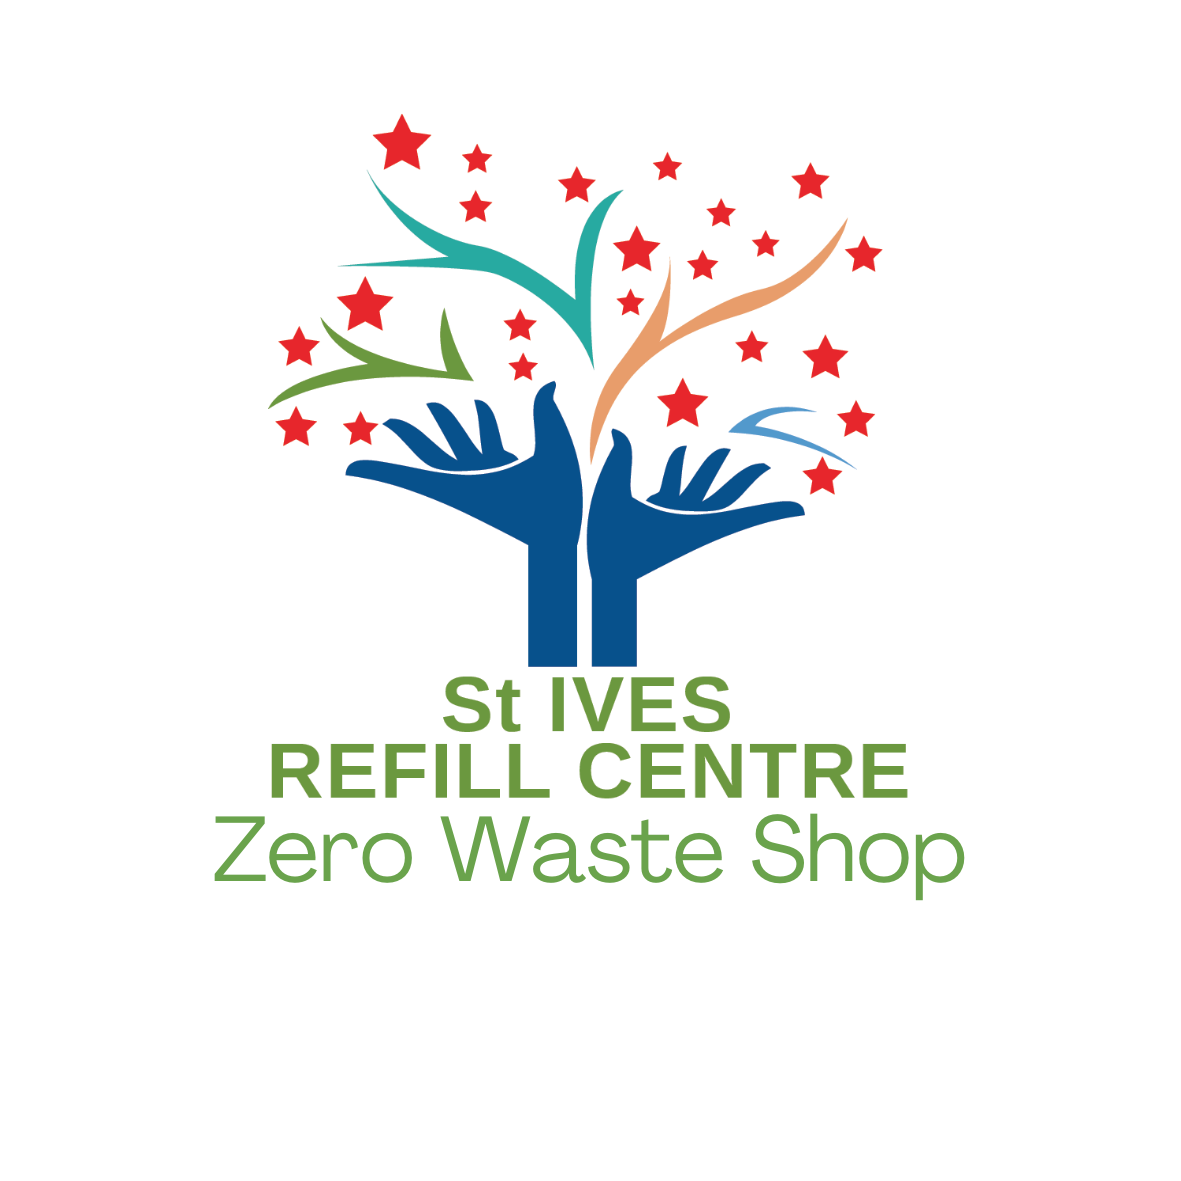 St Ives Refill and Zero Waste Shop logo